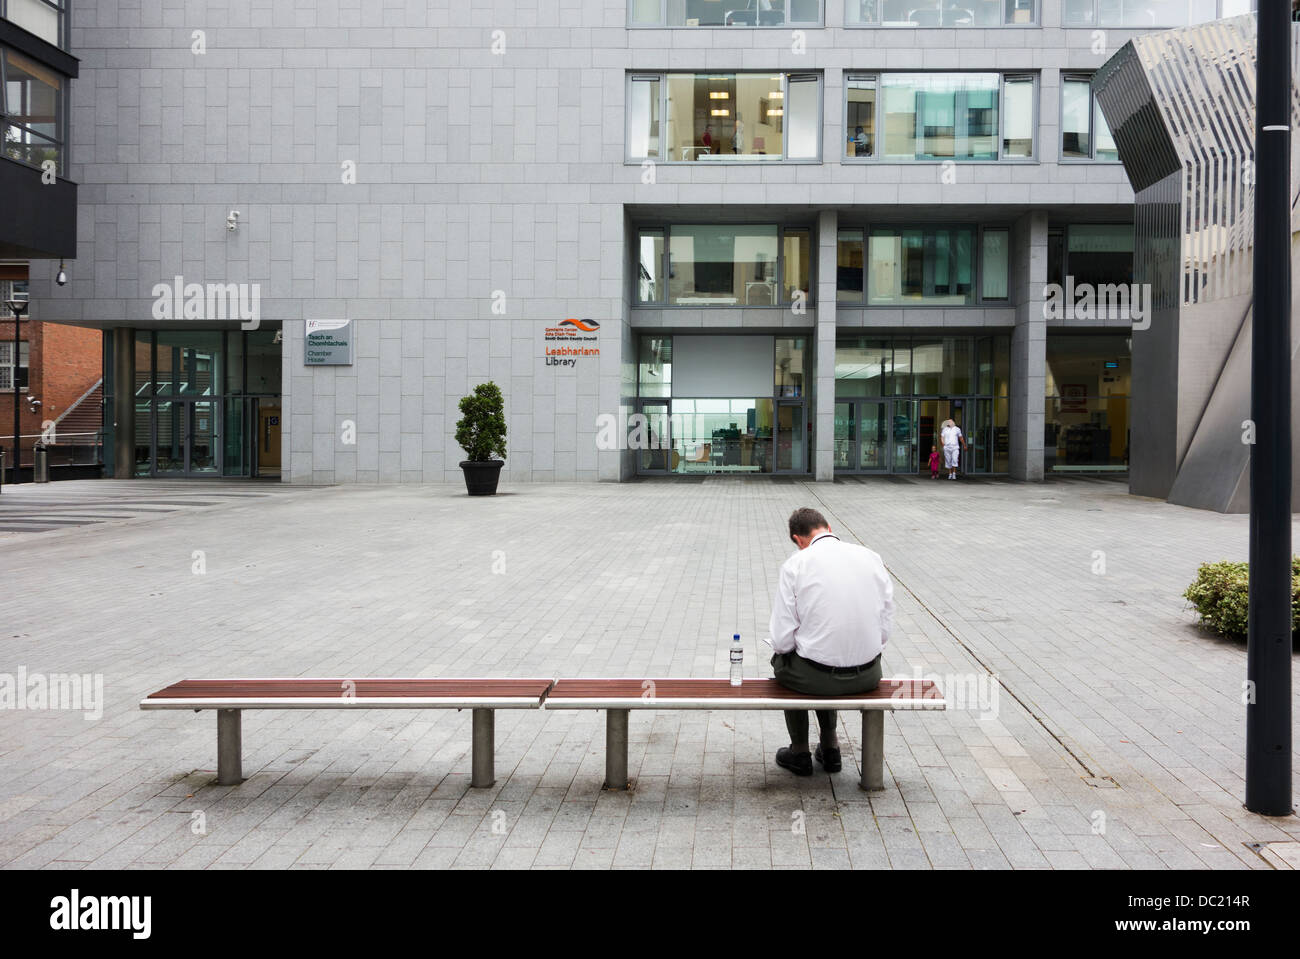 Rear view of man reading while sitting on bench in public square / area - Dublin Ireland Stock Photo